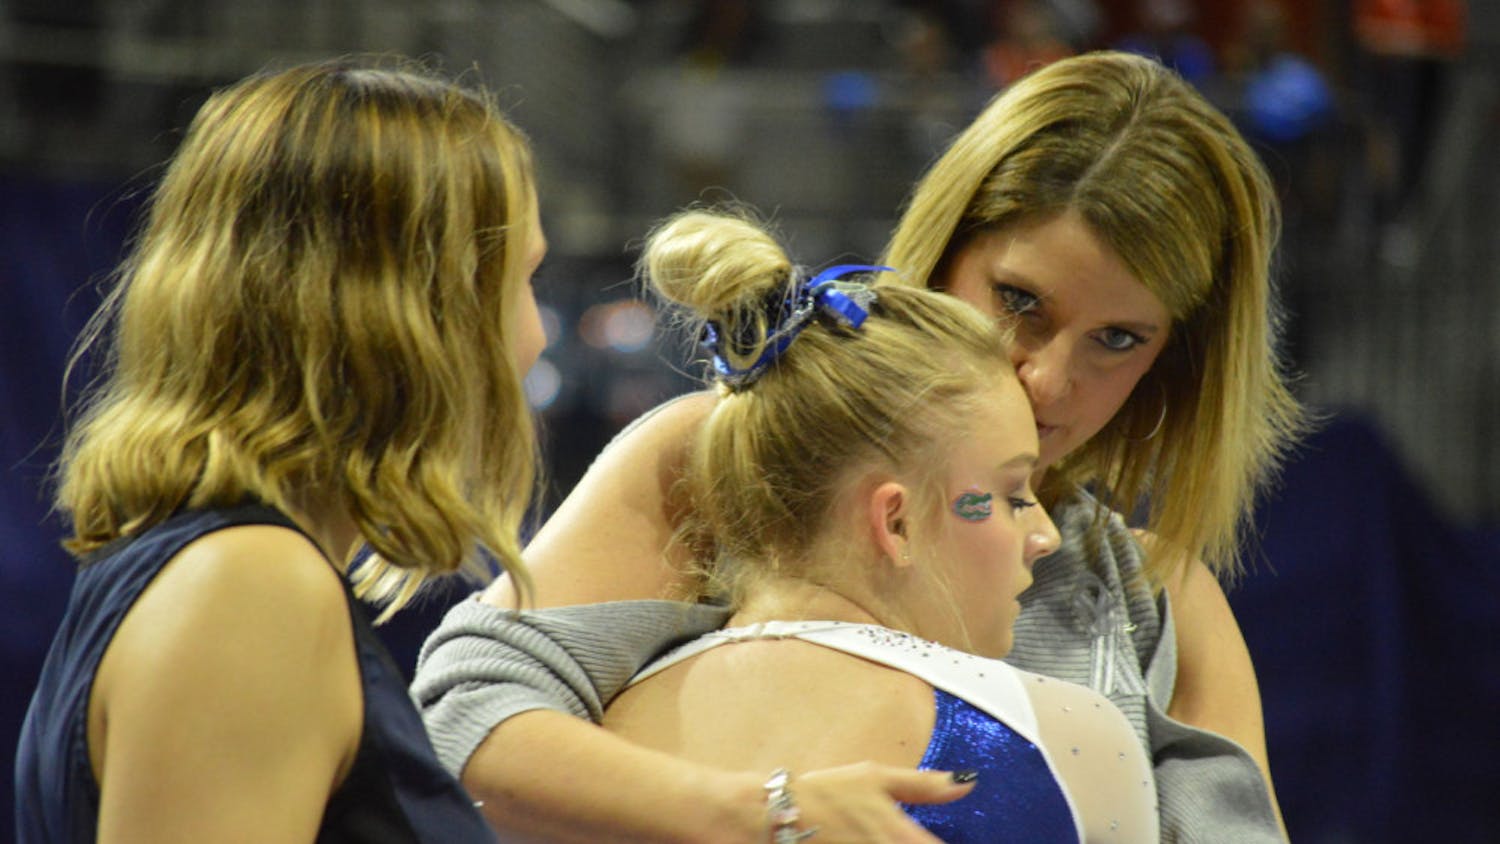 Gymnastics coach Jenny Rowland  praised her team’s mental fortitude Friday night.“They continued to fight all the way through to the very last performance as it was tight all the way up until that very last dismount.”